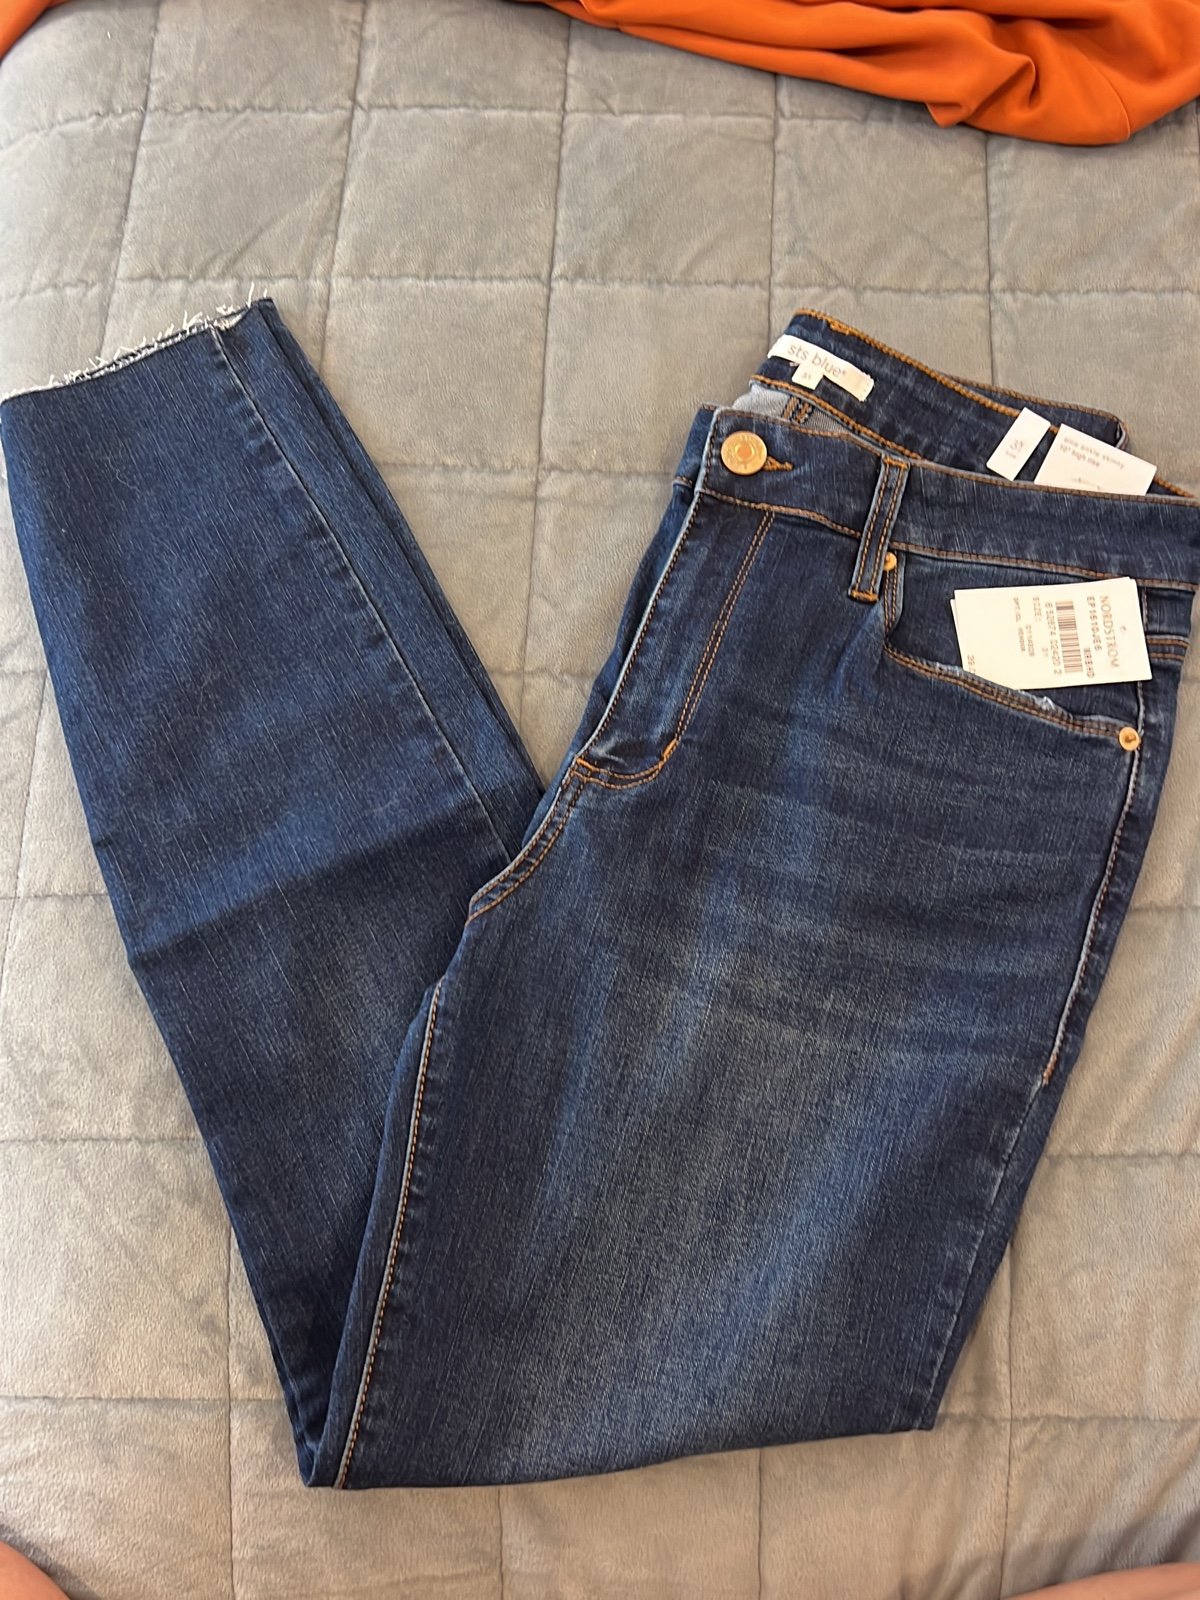 Simple Nordstrom sts blue jeans jK7kmCdiR no tax